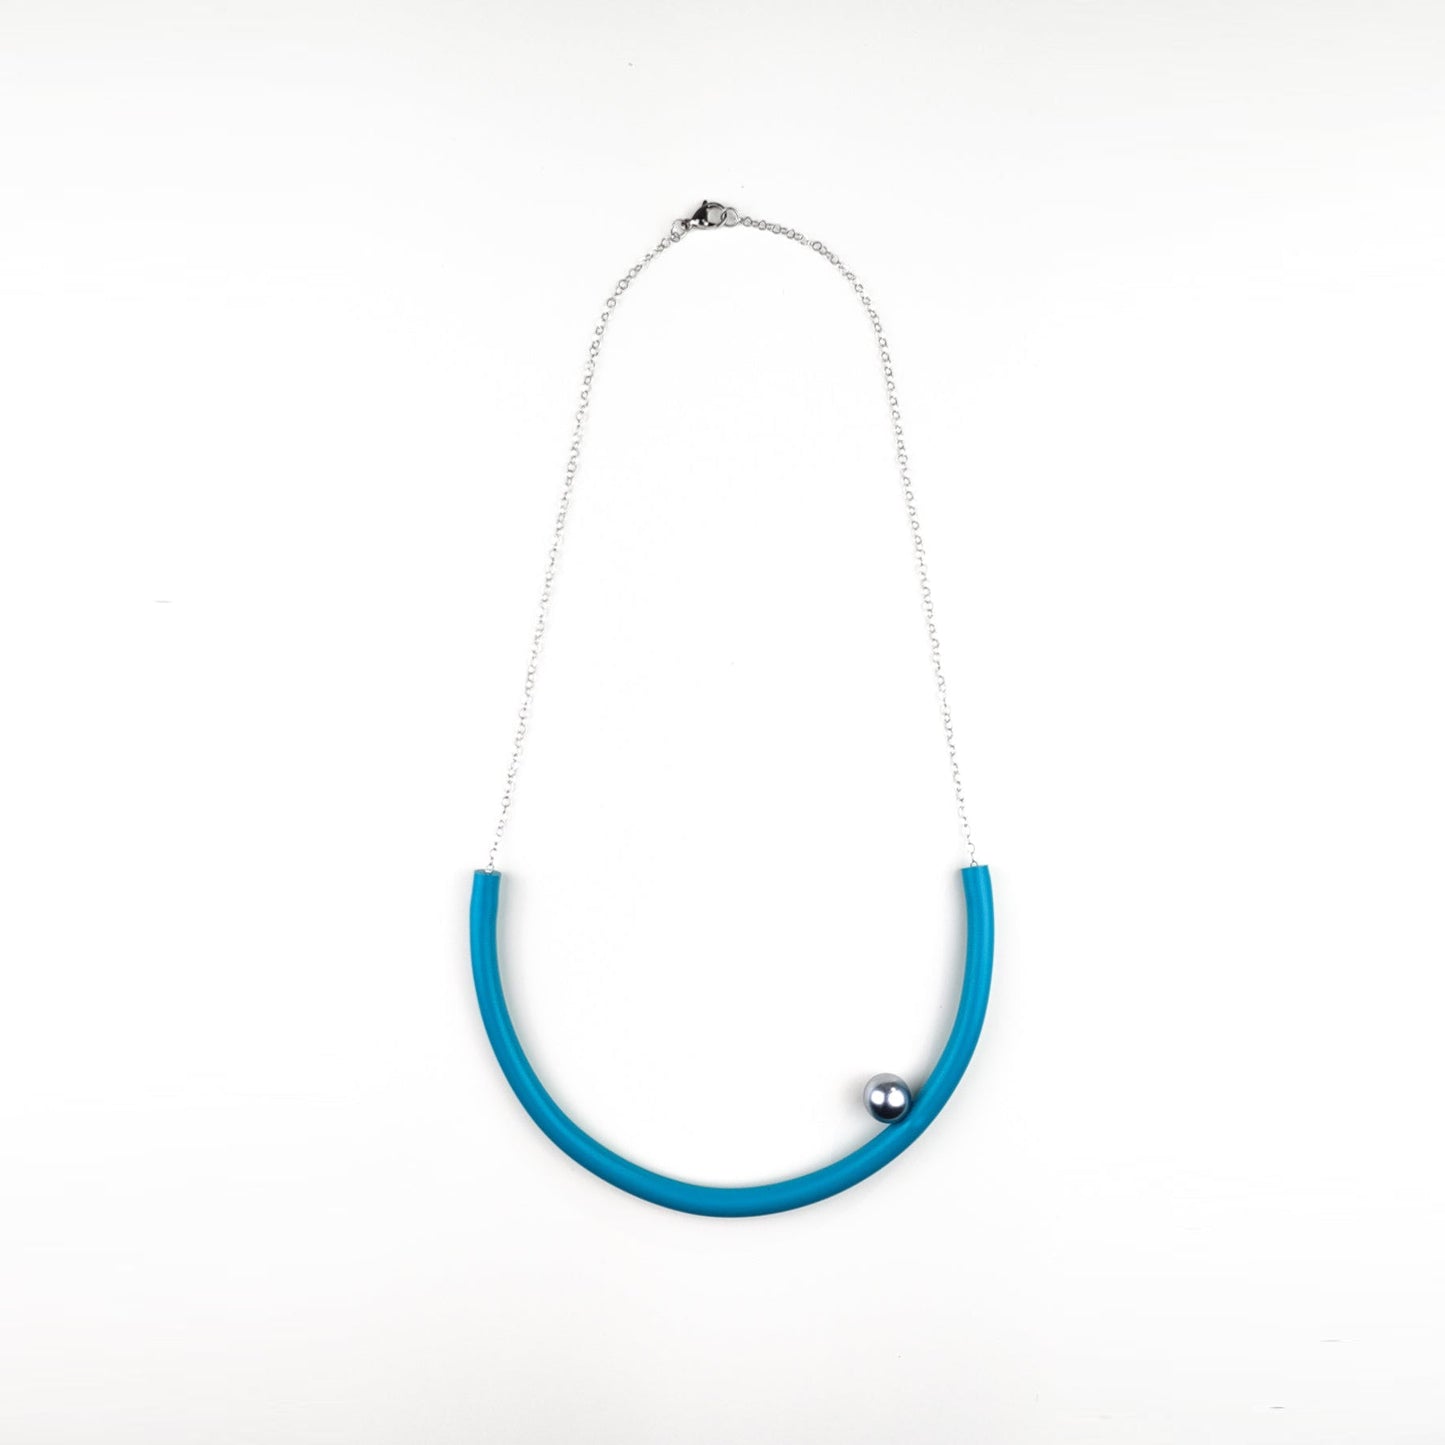 BILICO round necklace - teal color / white pearl